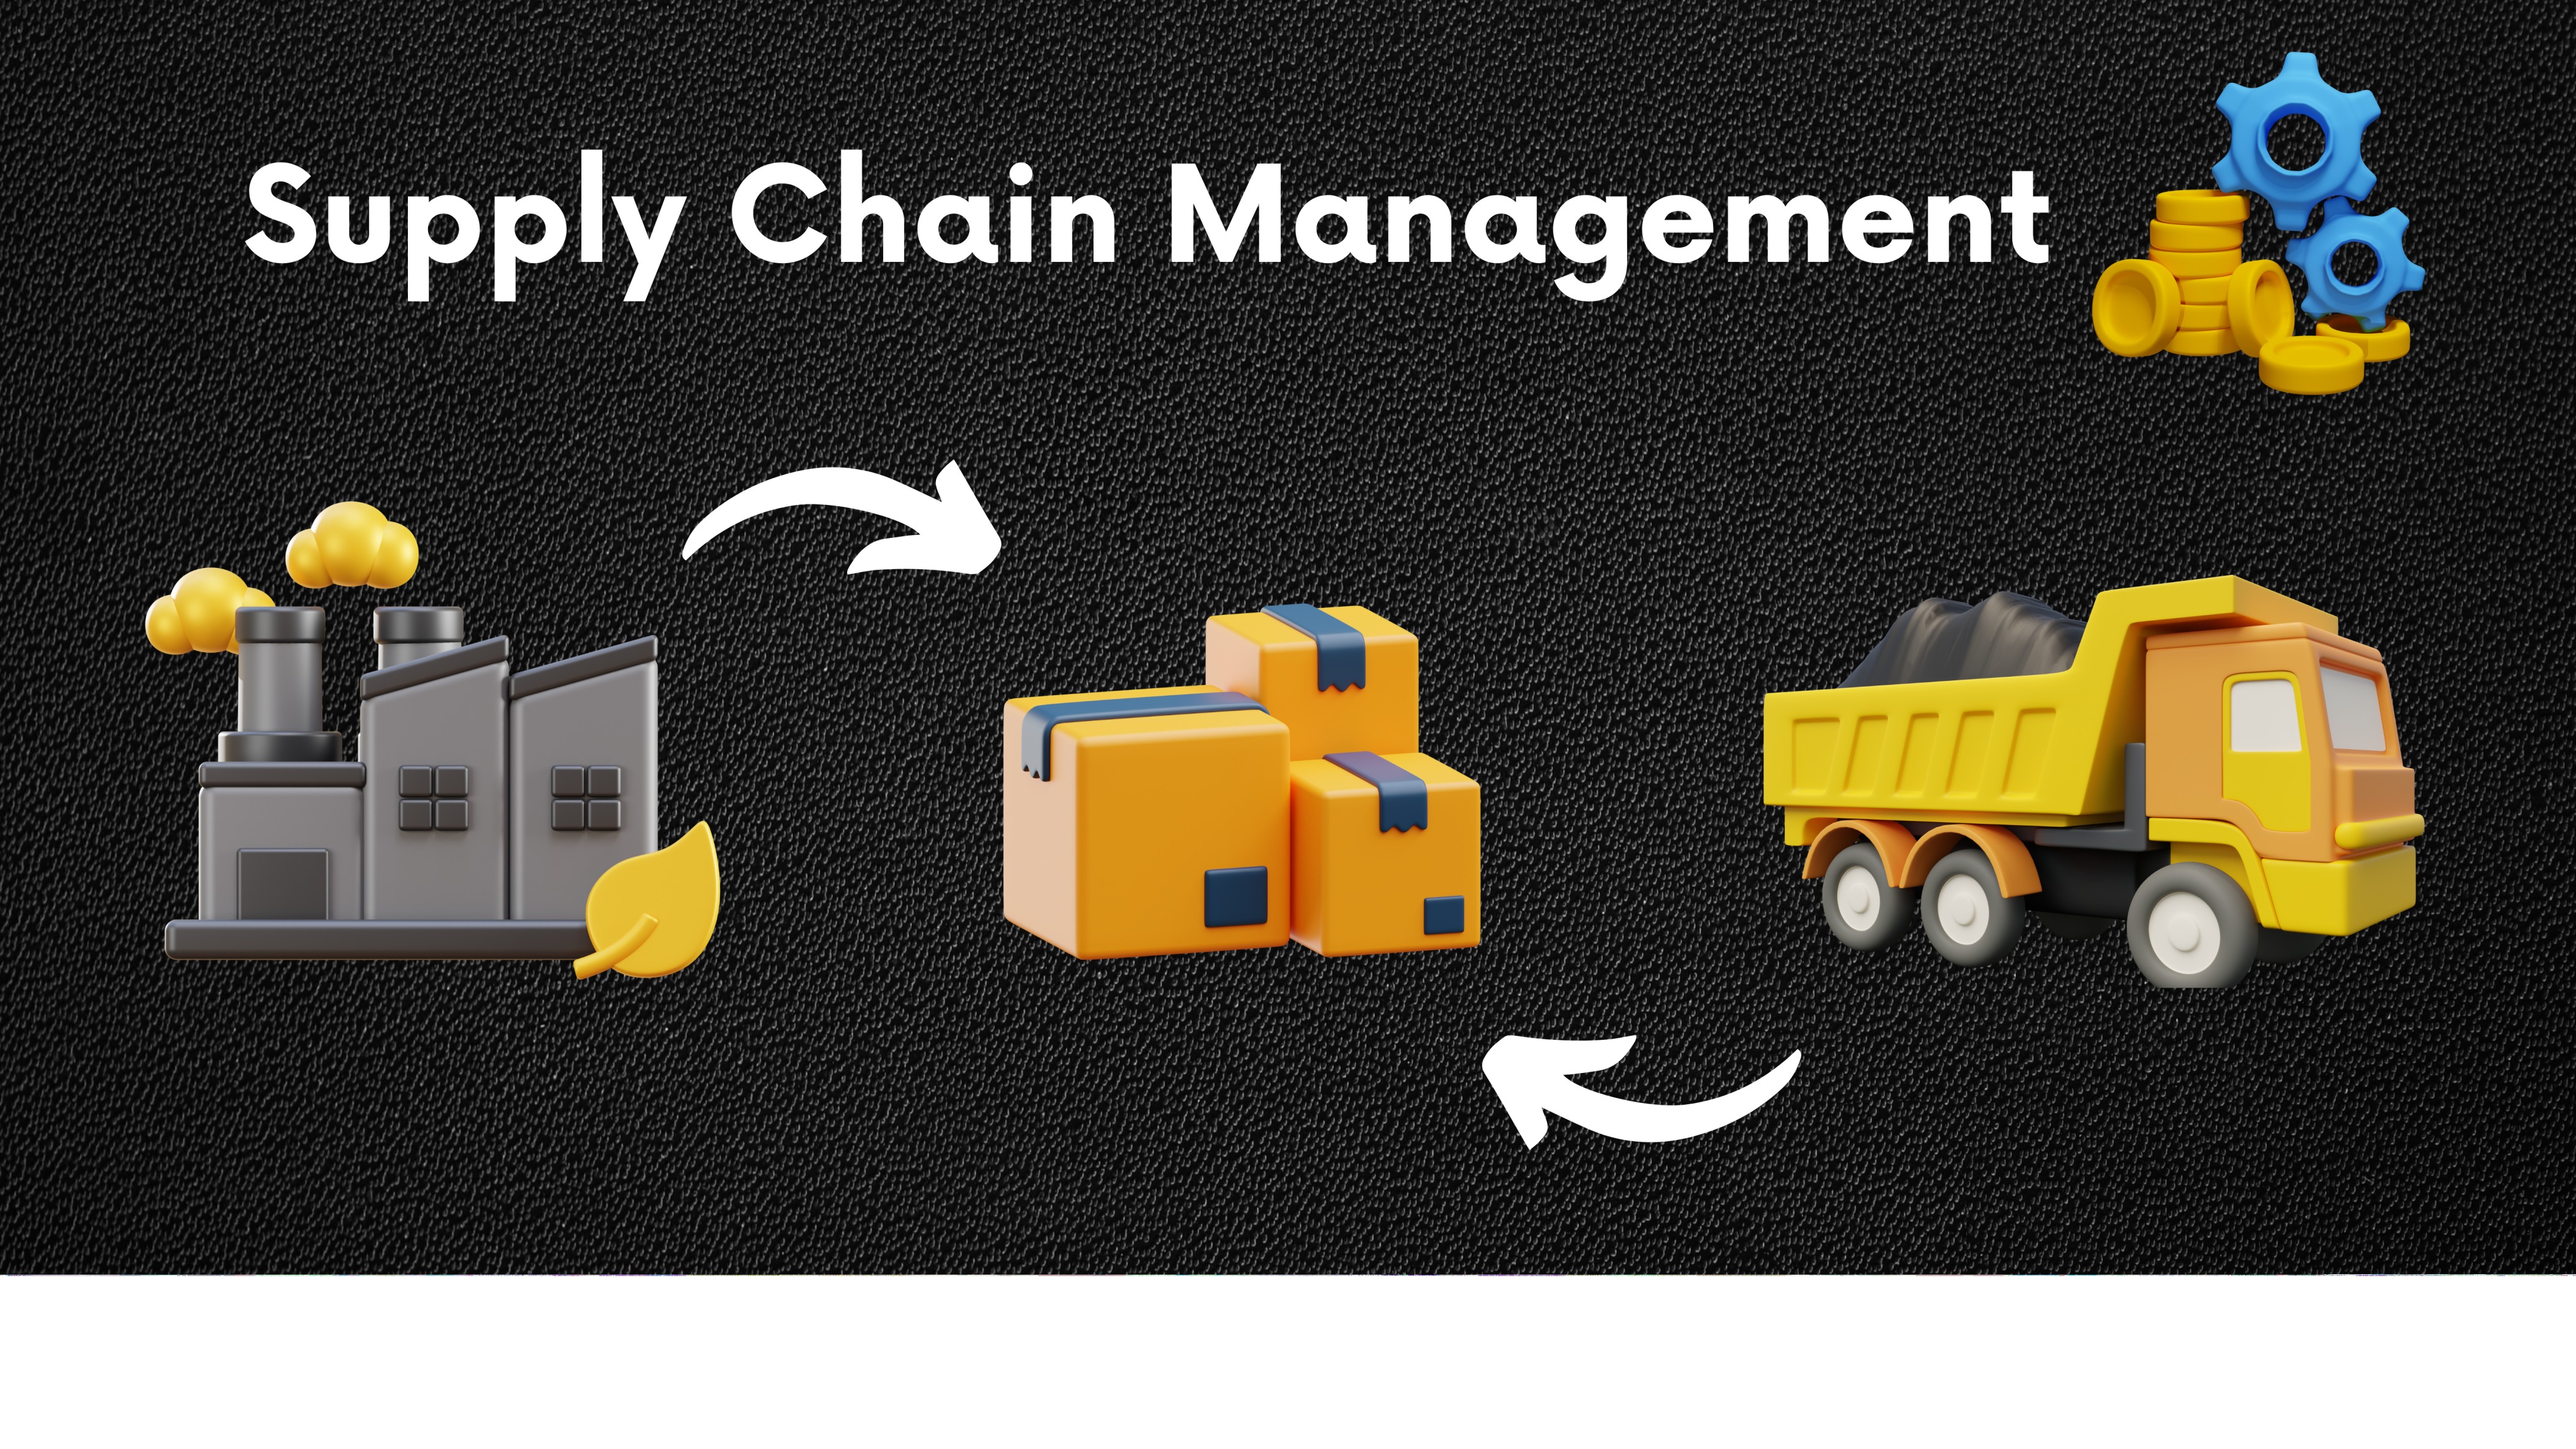 Cost model application for supply chain management